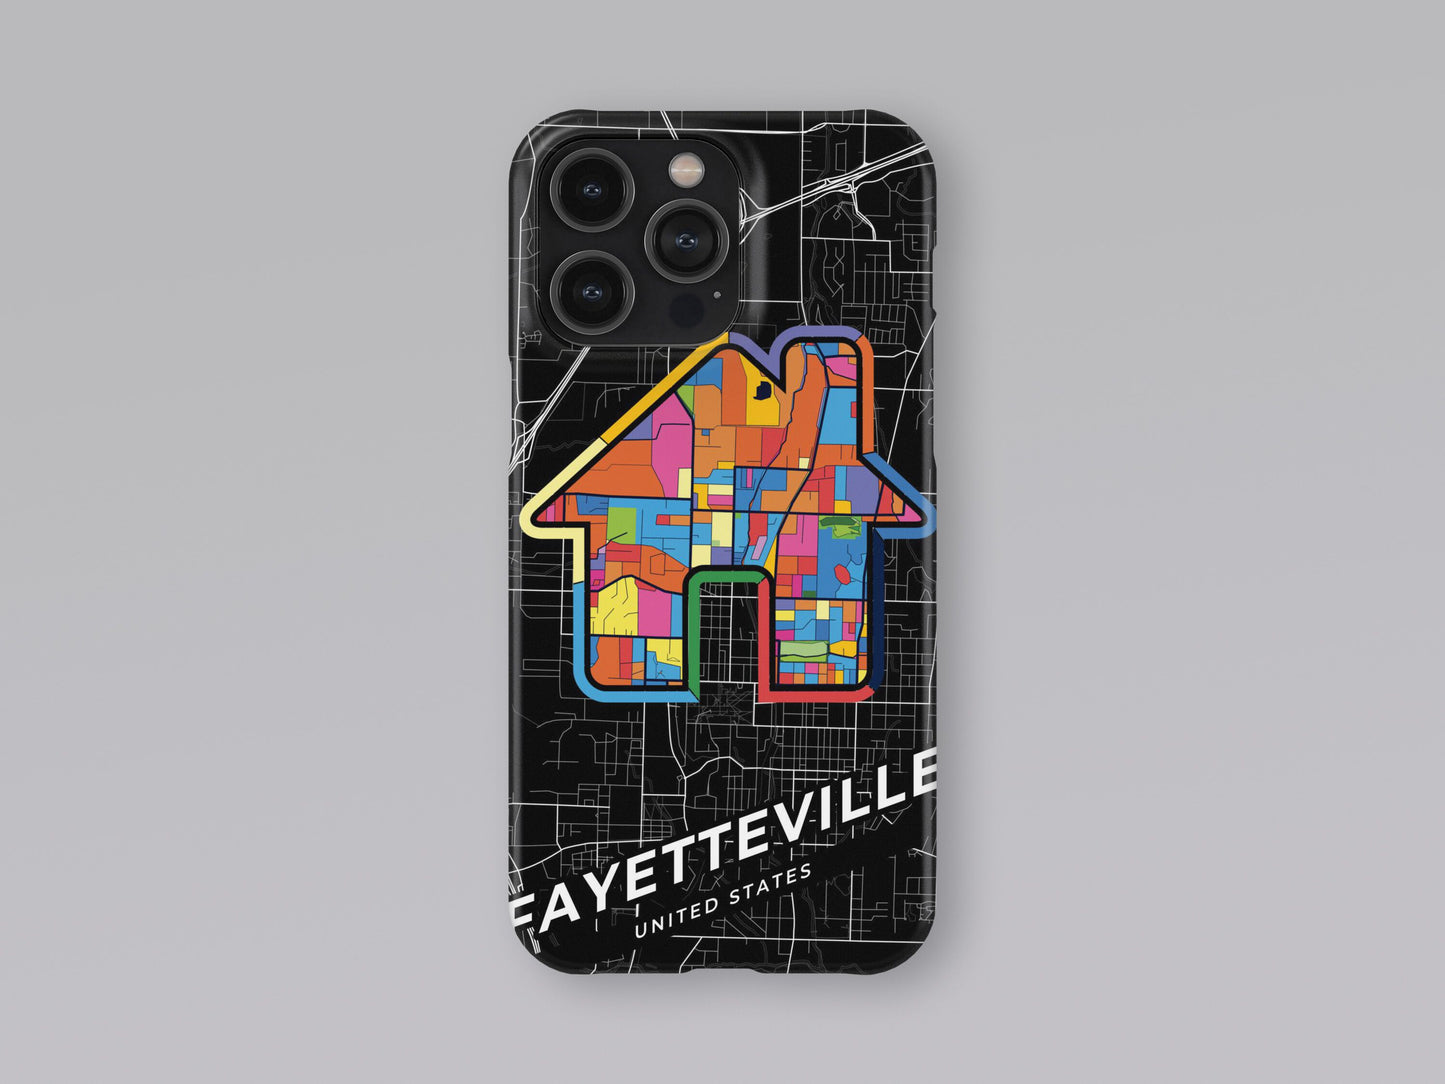 Fayetteville Arkansas slim phone case with colorful icon. Birthday, wedding or housewarming gift. Couple match cases. 3